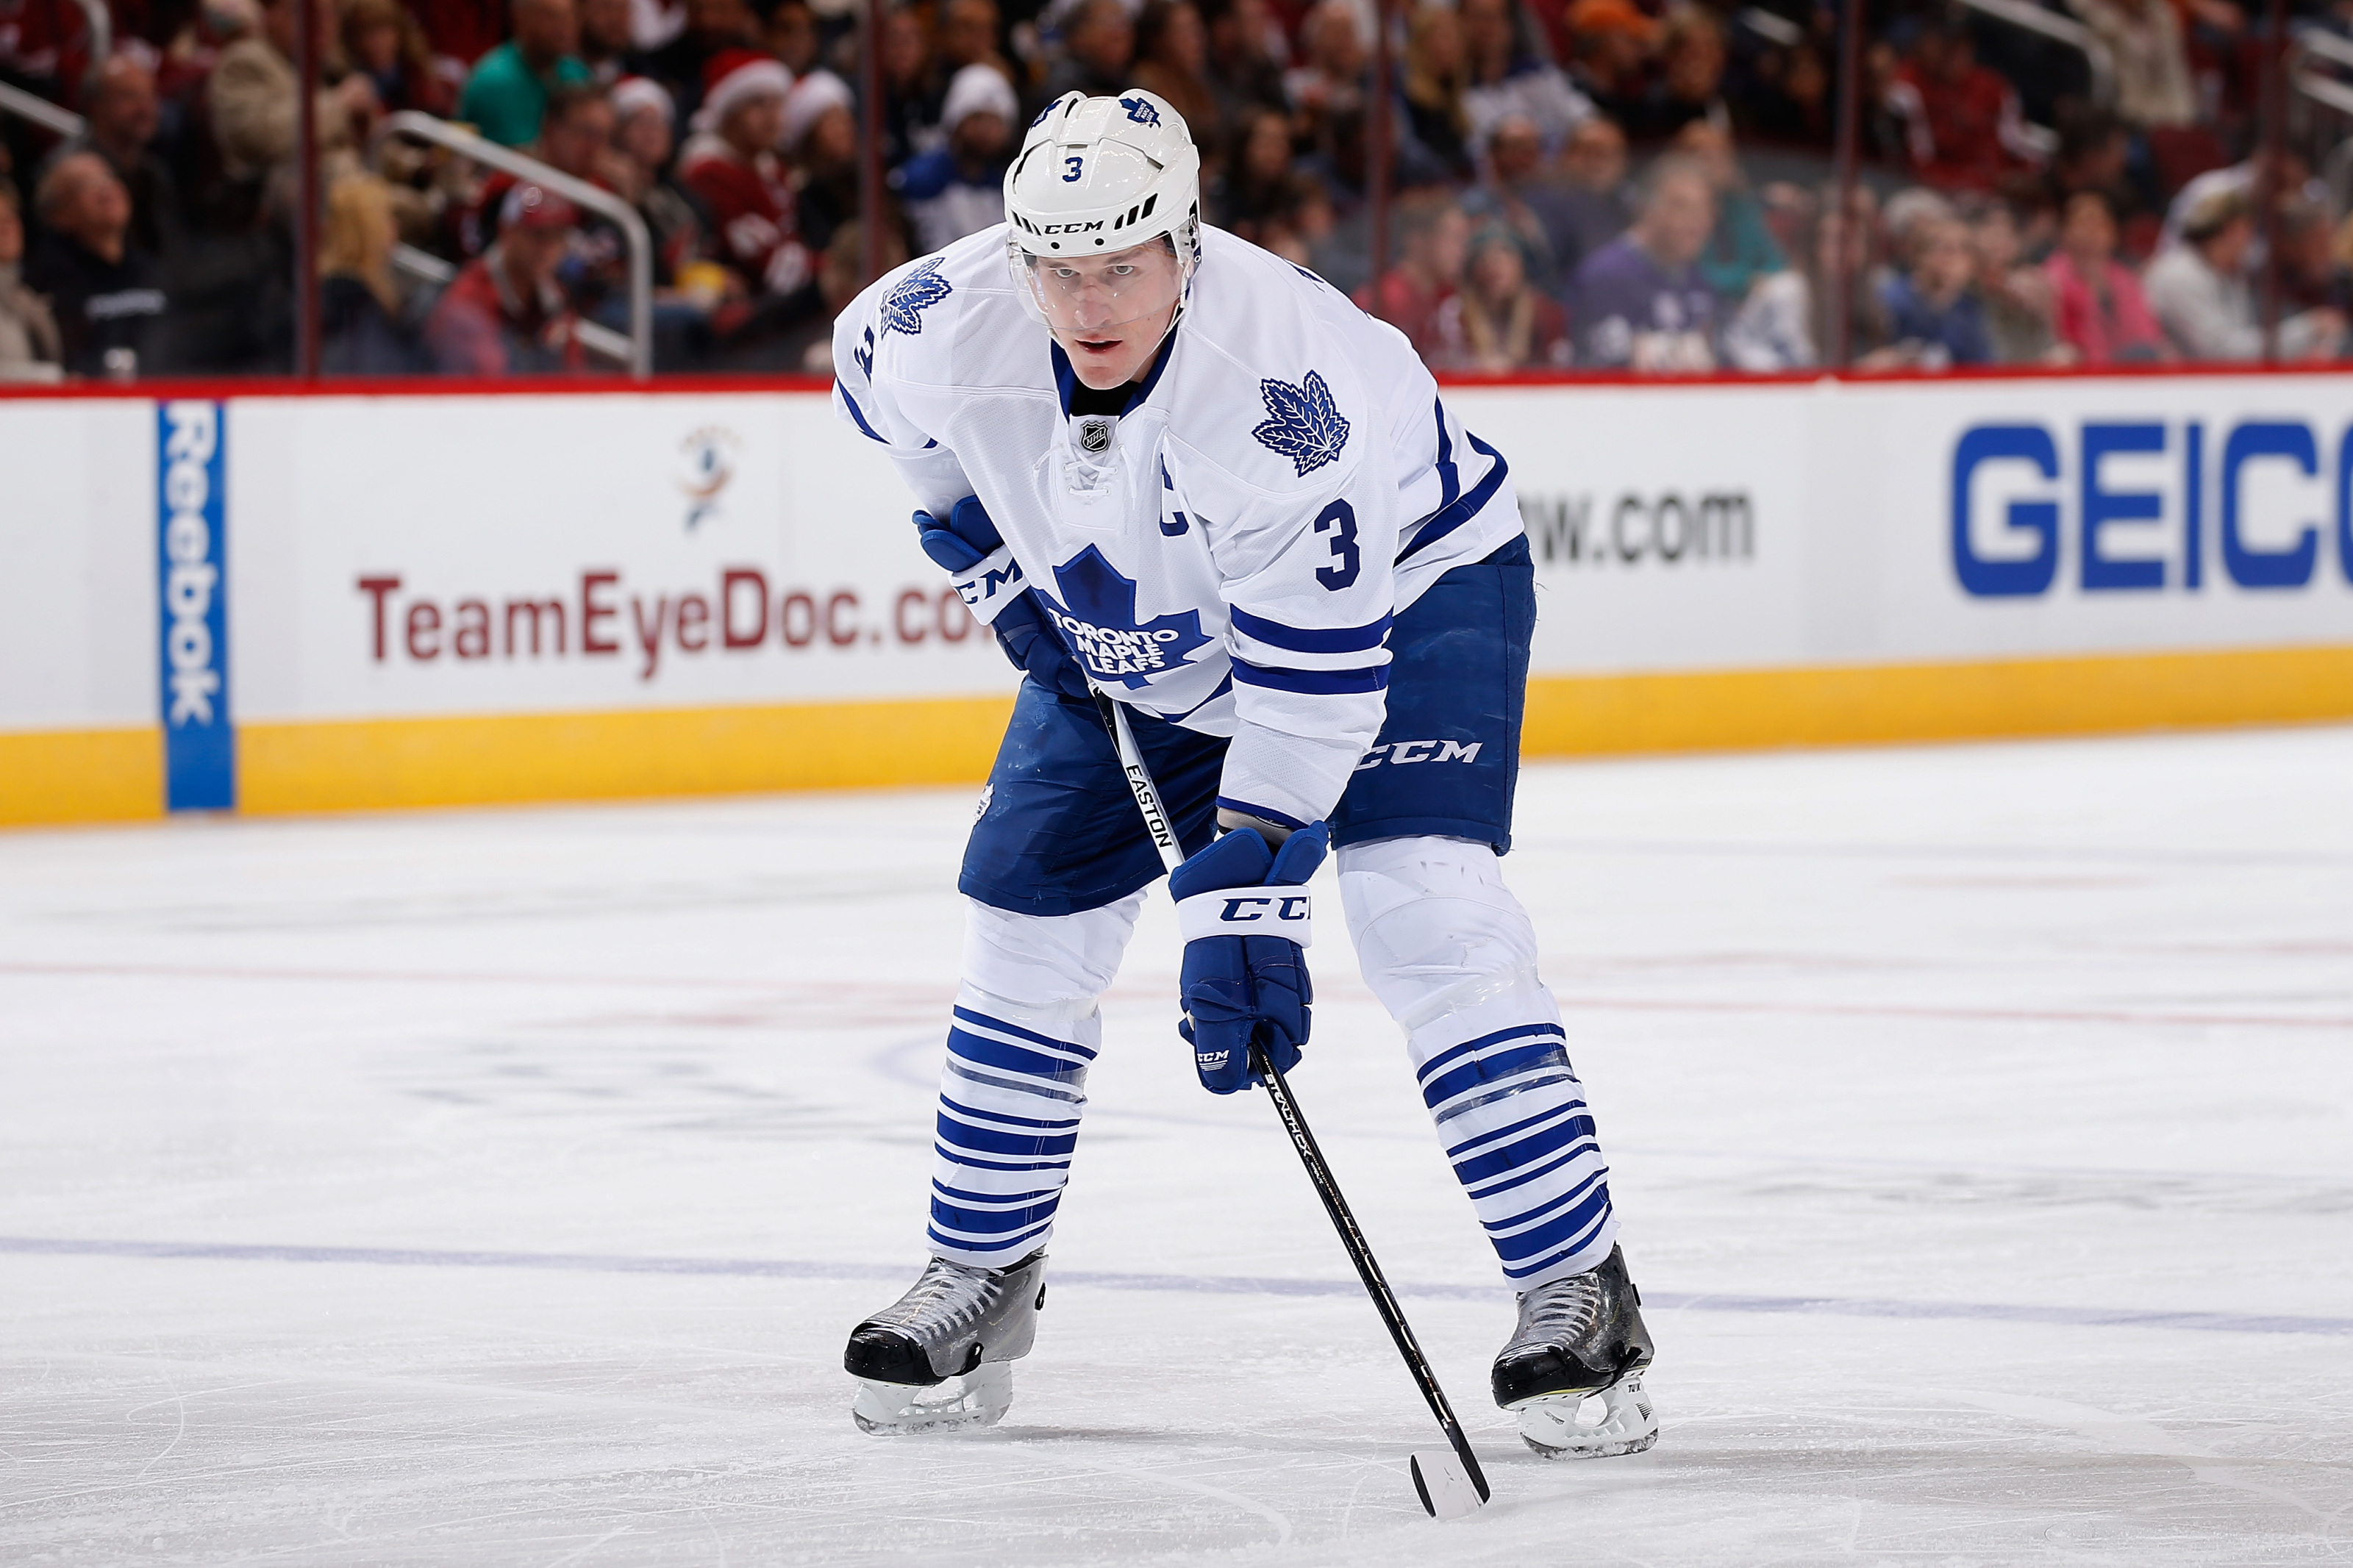 The return of Dion Phaneuf? - Streets Of Toronto